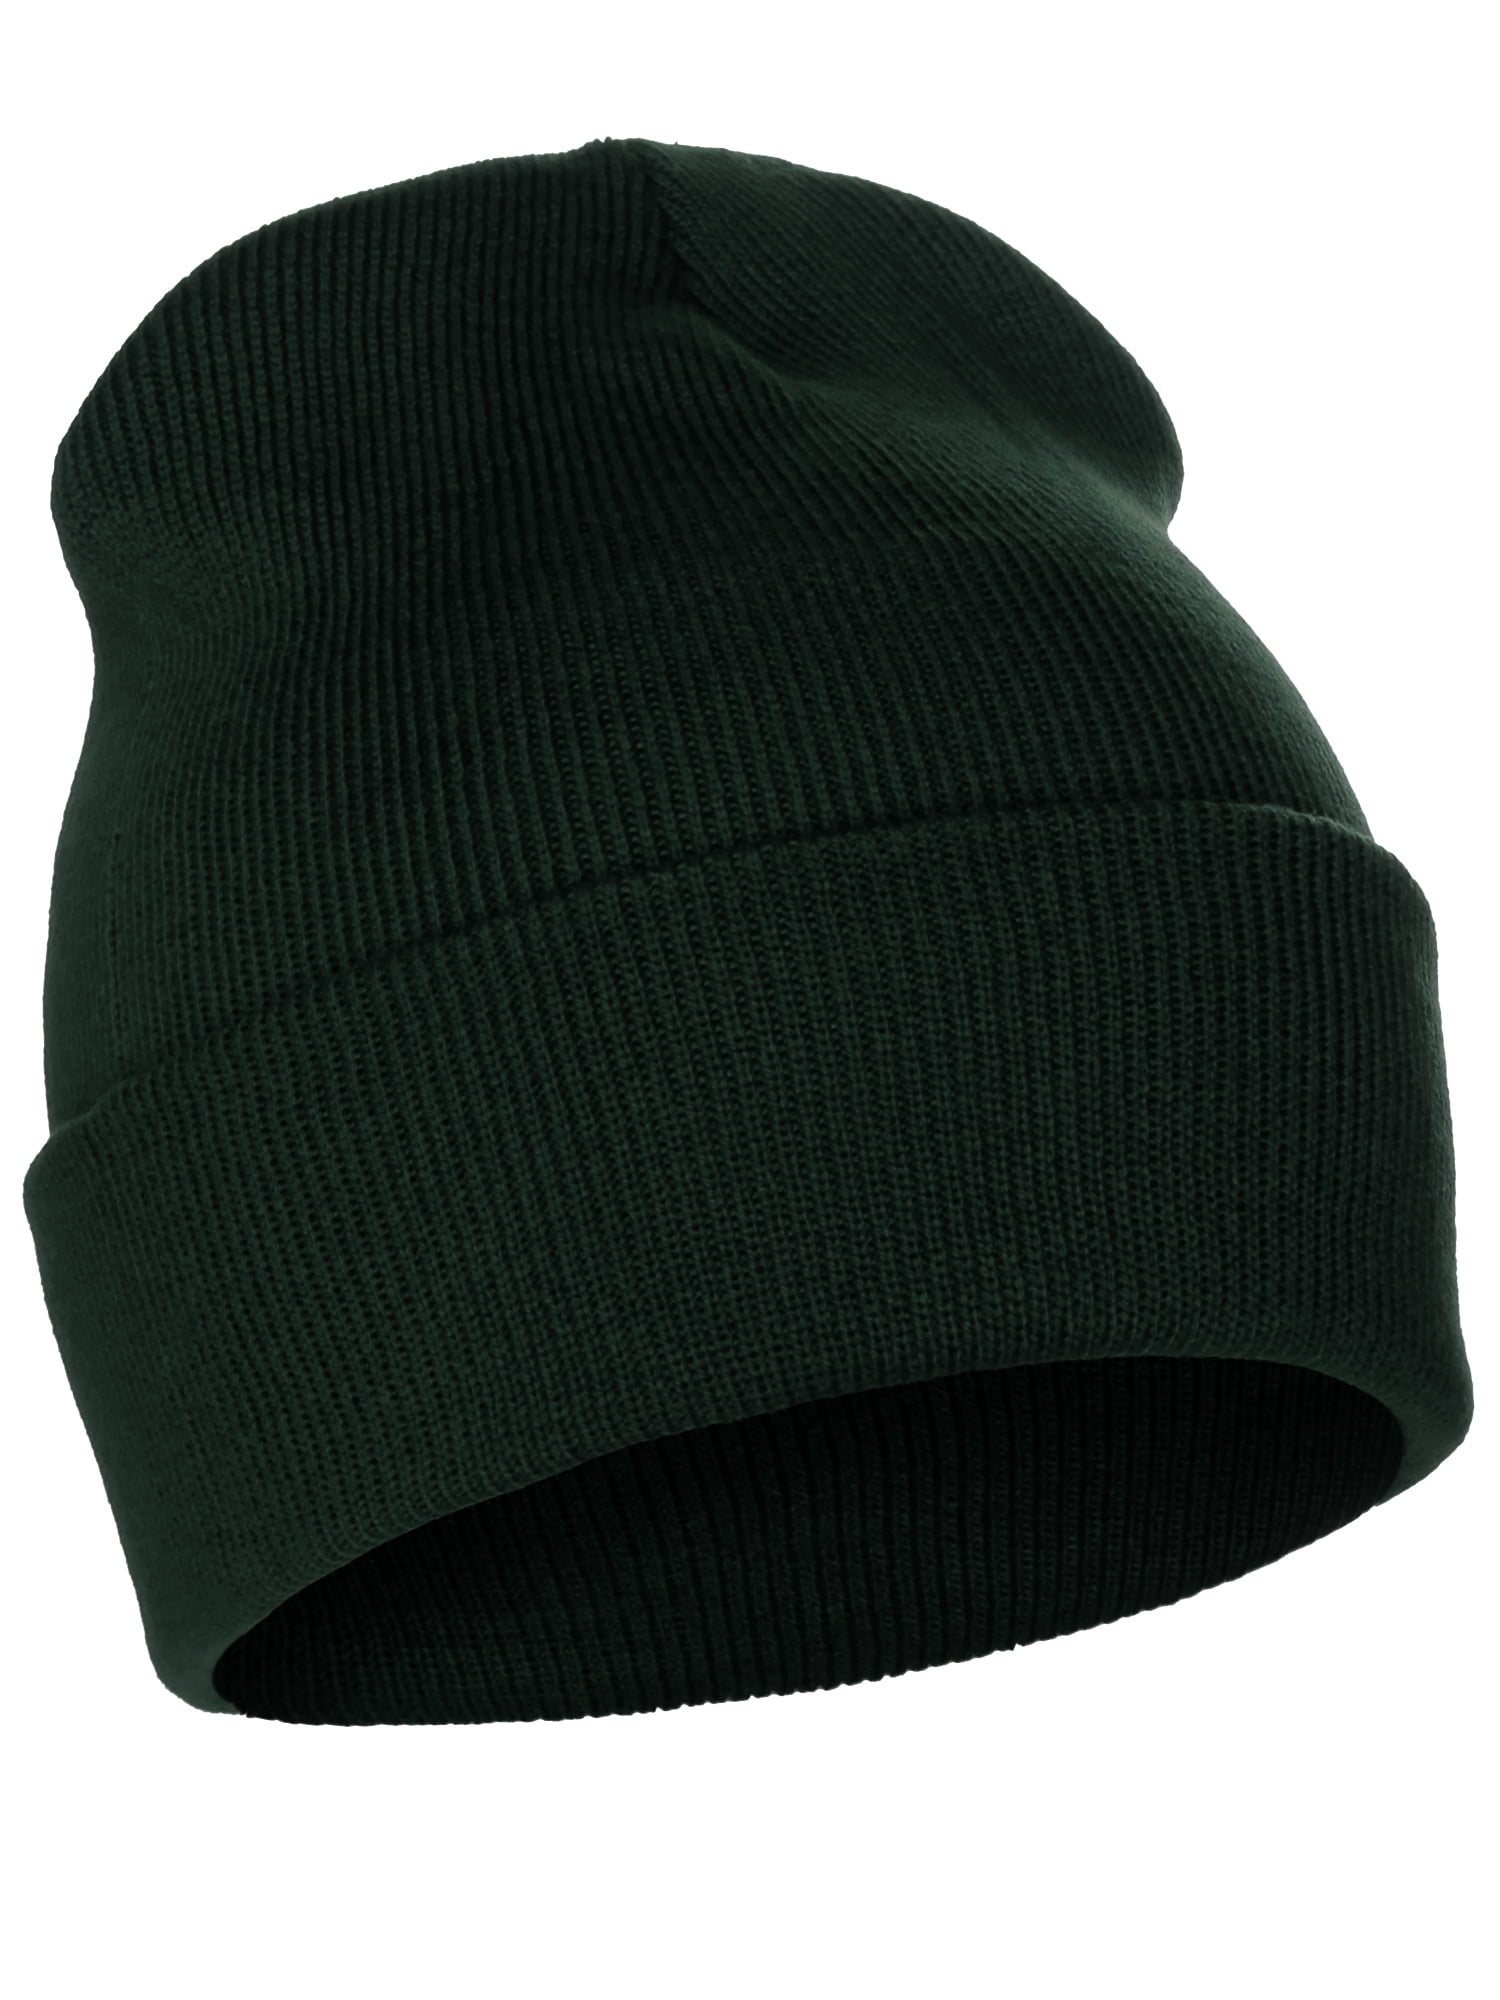 Cuffed Skully Cap, Plain Classic Hat Beanie Knit Turquoise Winter